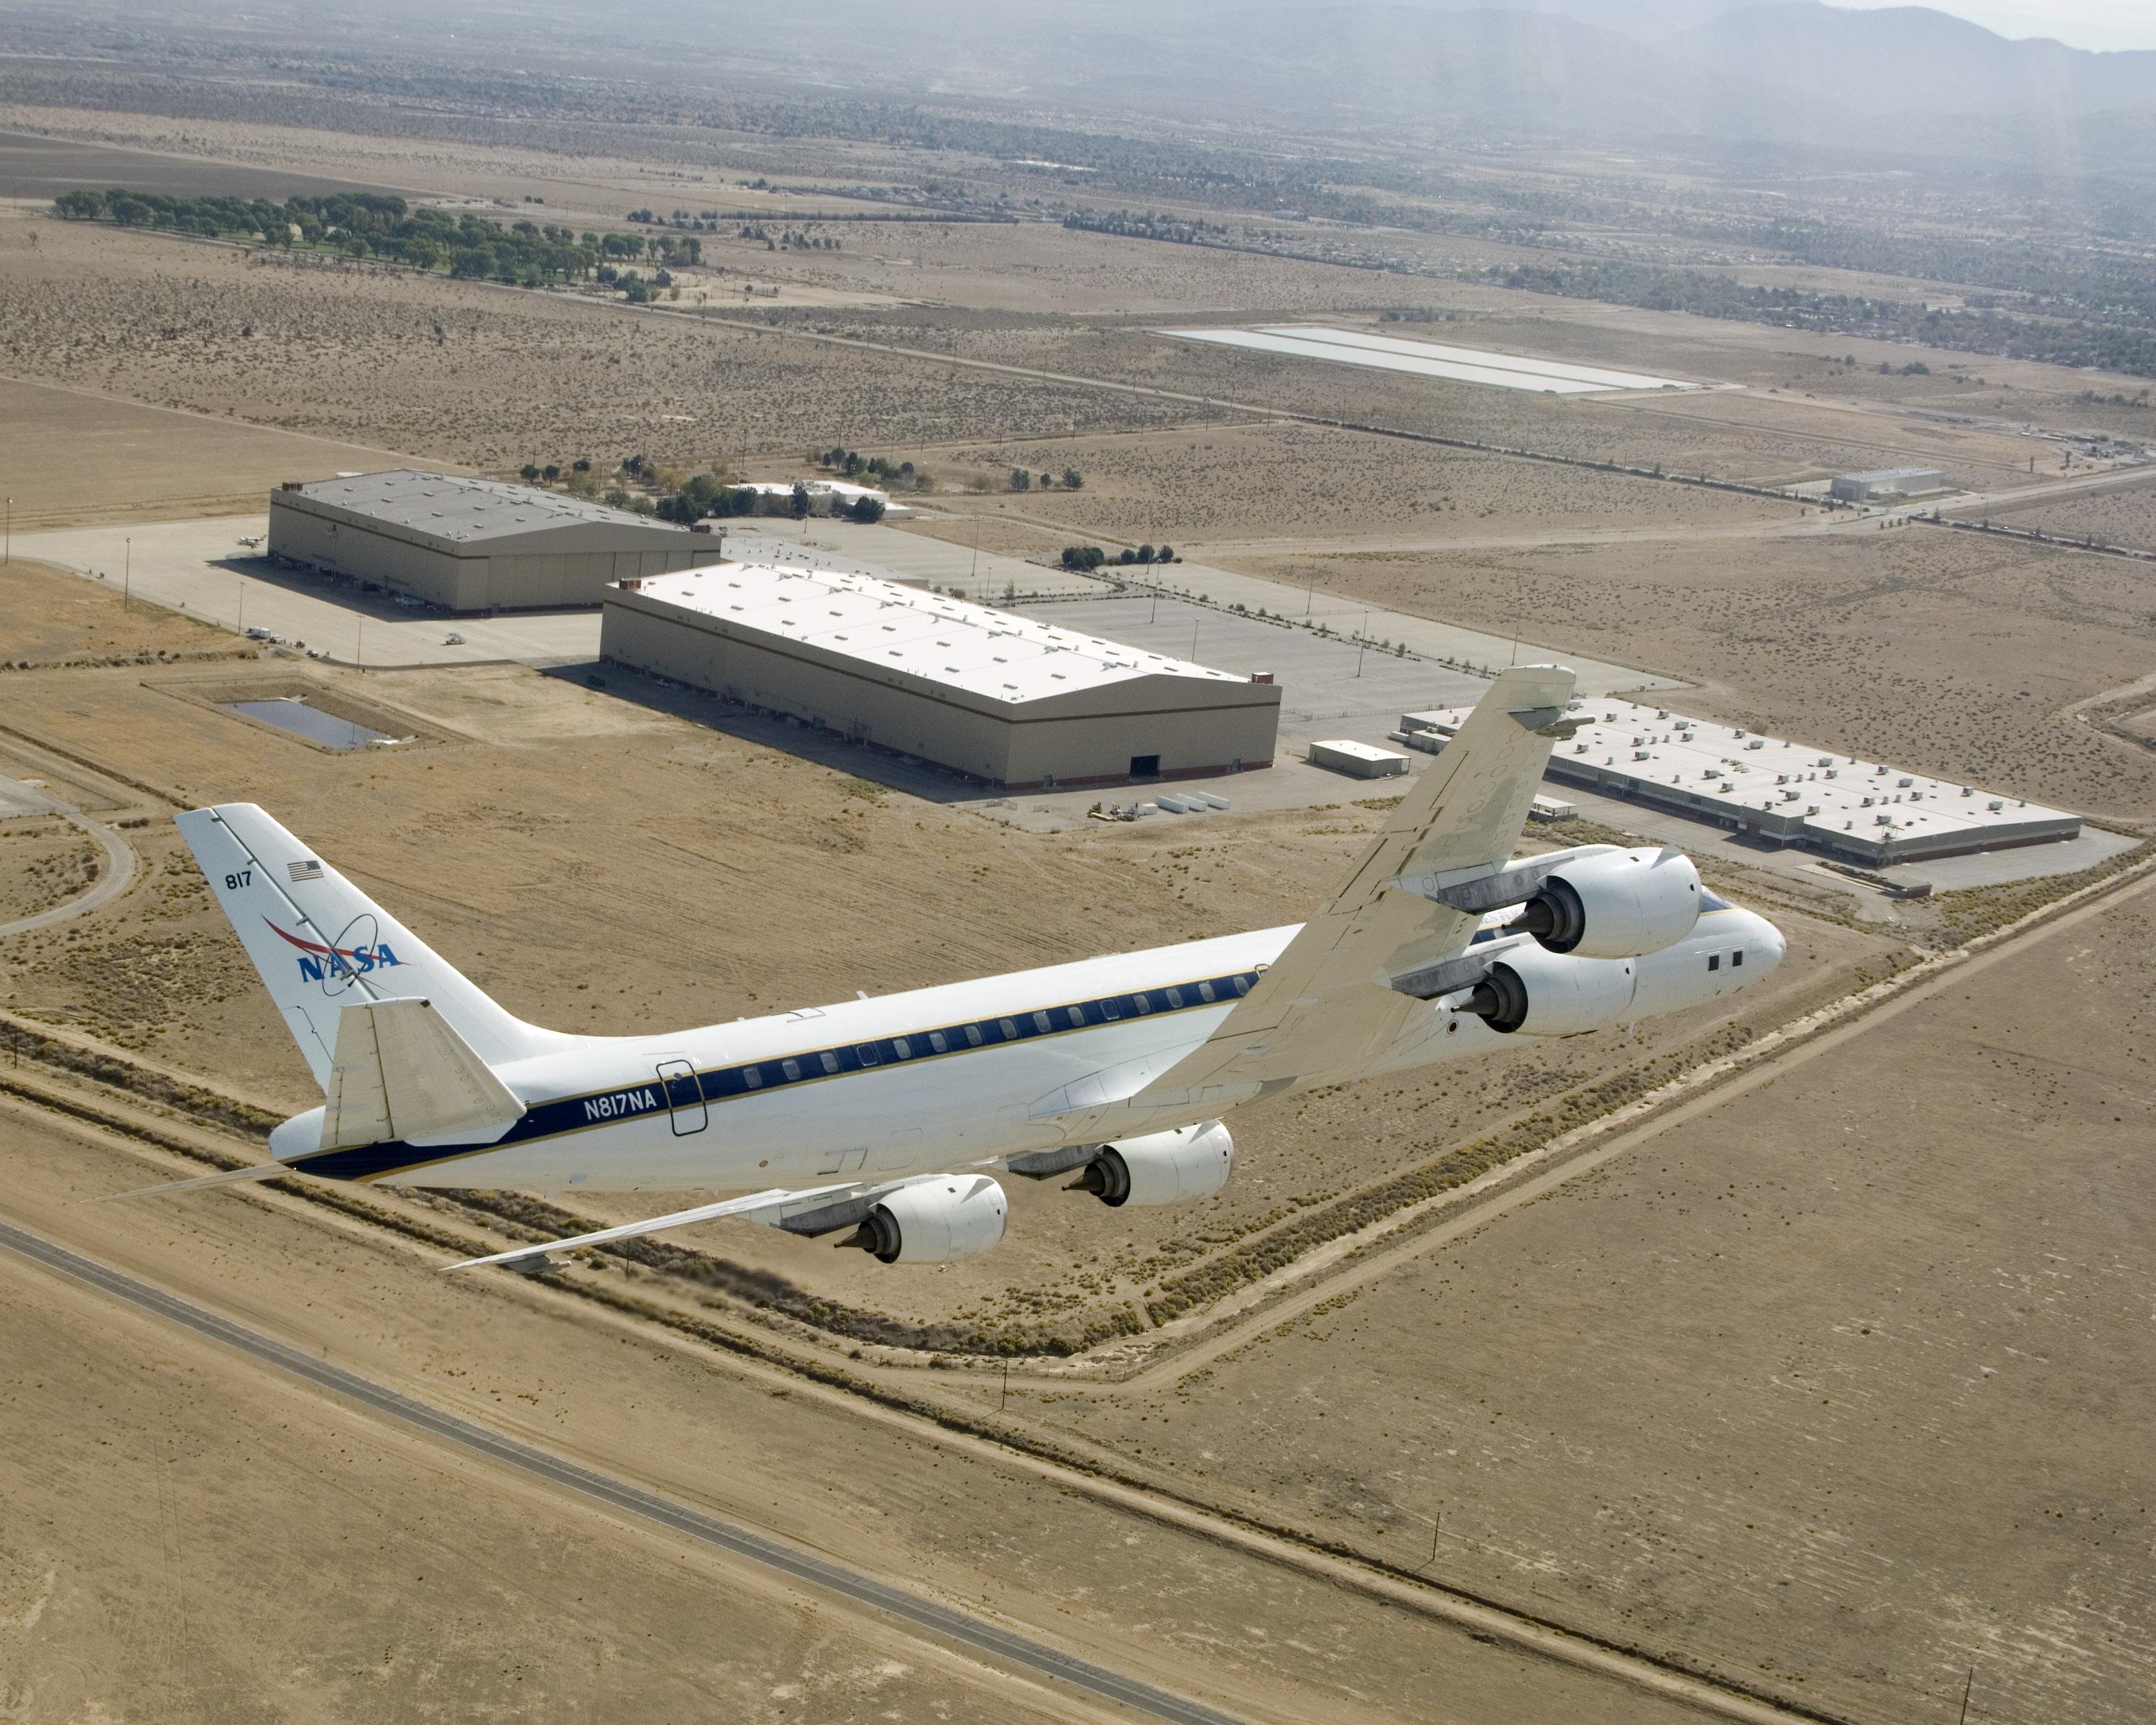 DC-8 banked over Dryden Aircraft Operations Facility